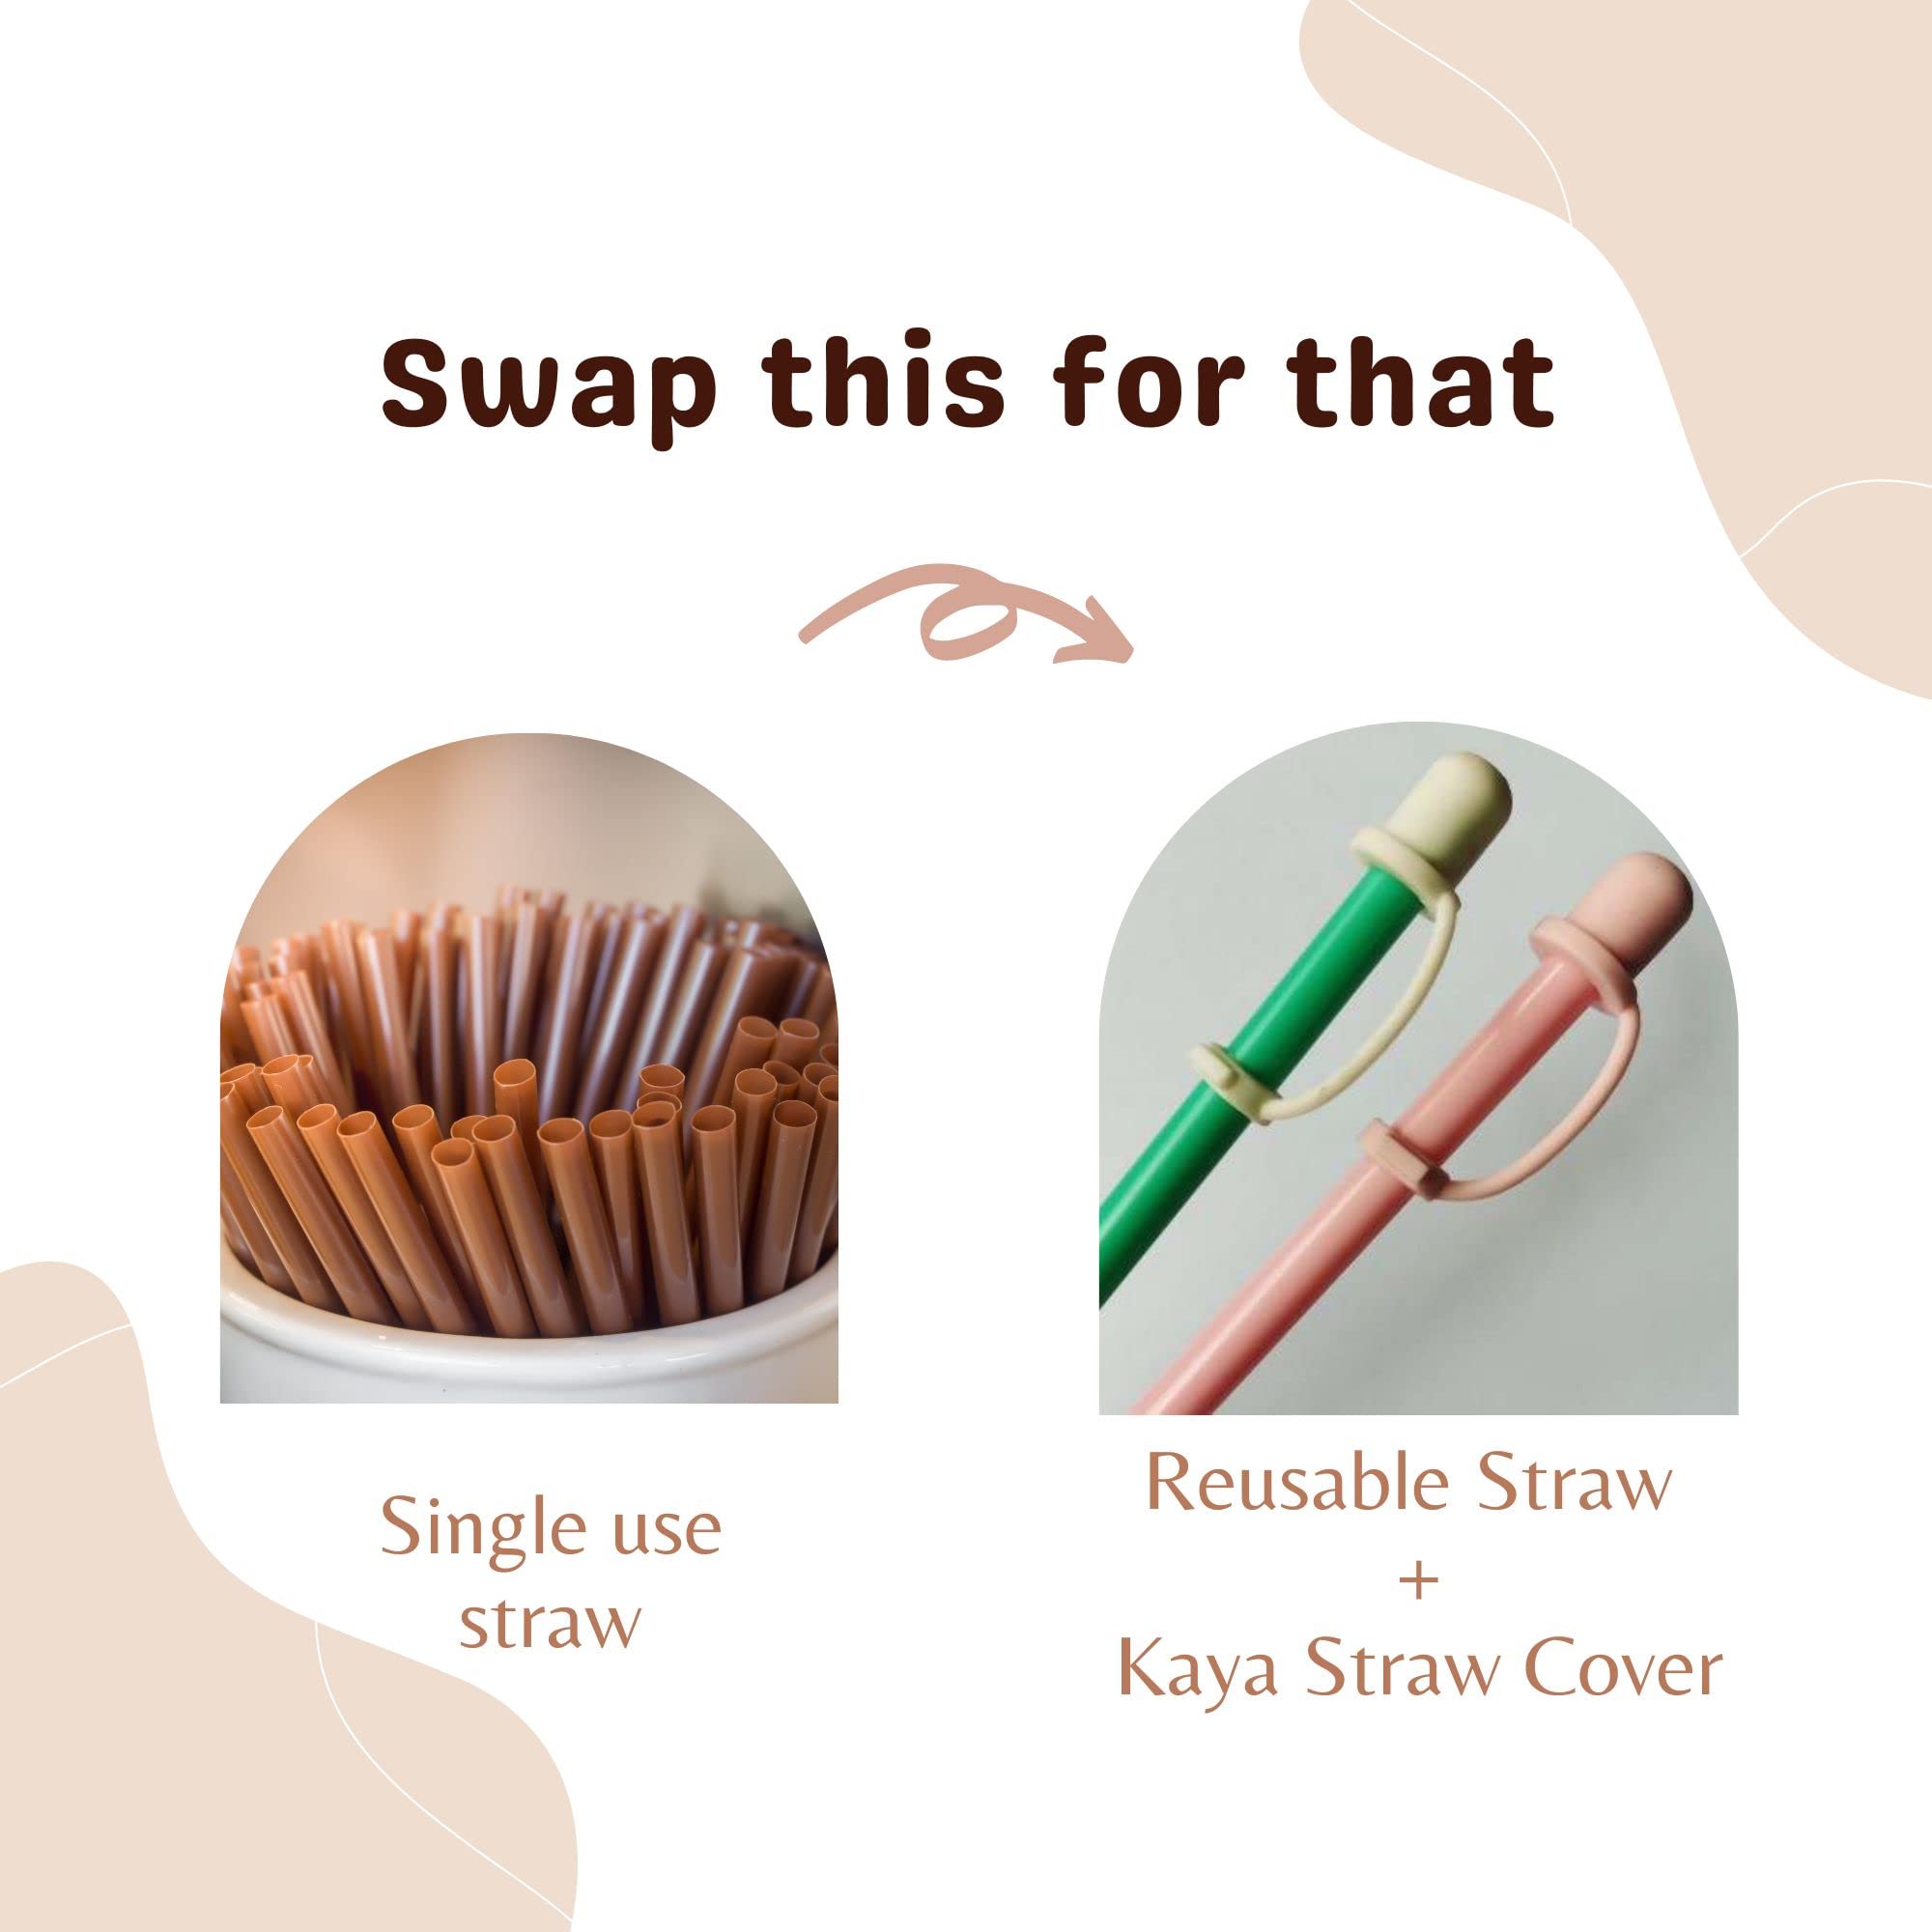 Kaya 5 Pcs Minimalist Silicone Straw Covers, Reusable and Expandable Straw Covers Up to 0.4inch/10mm Straws